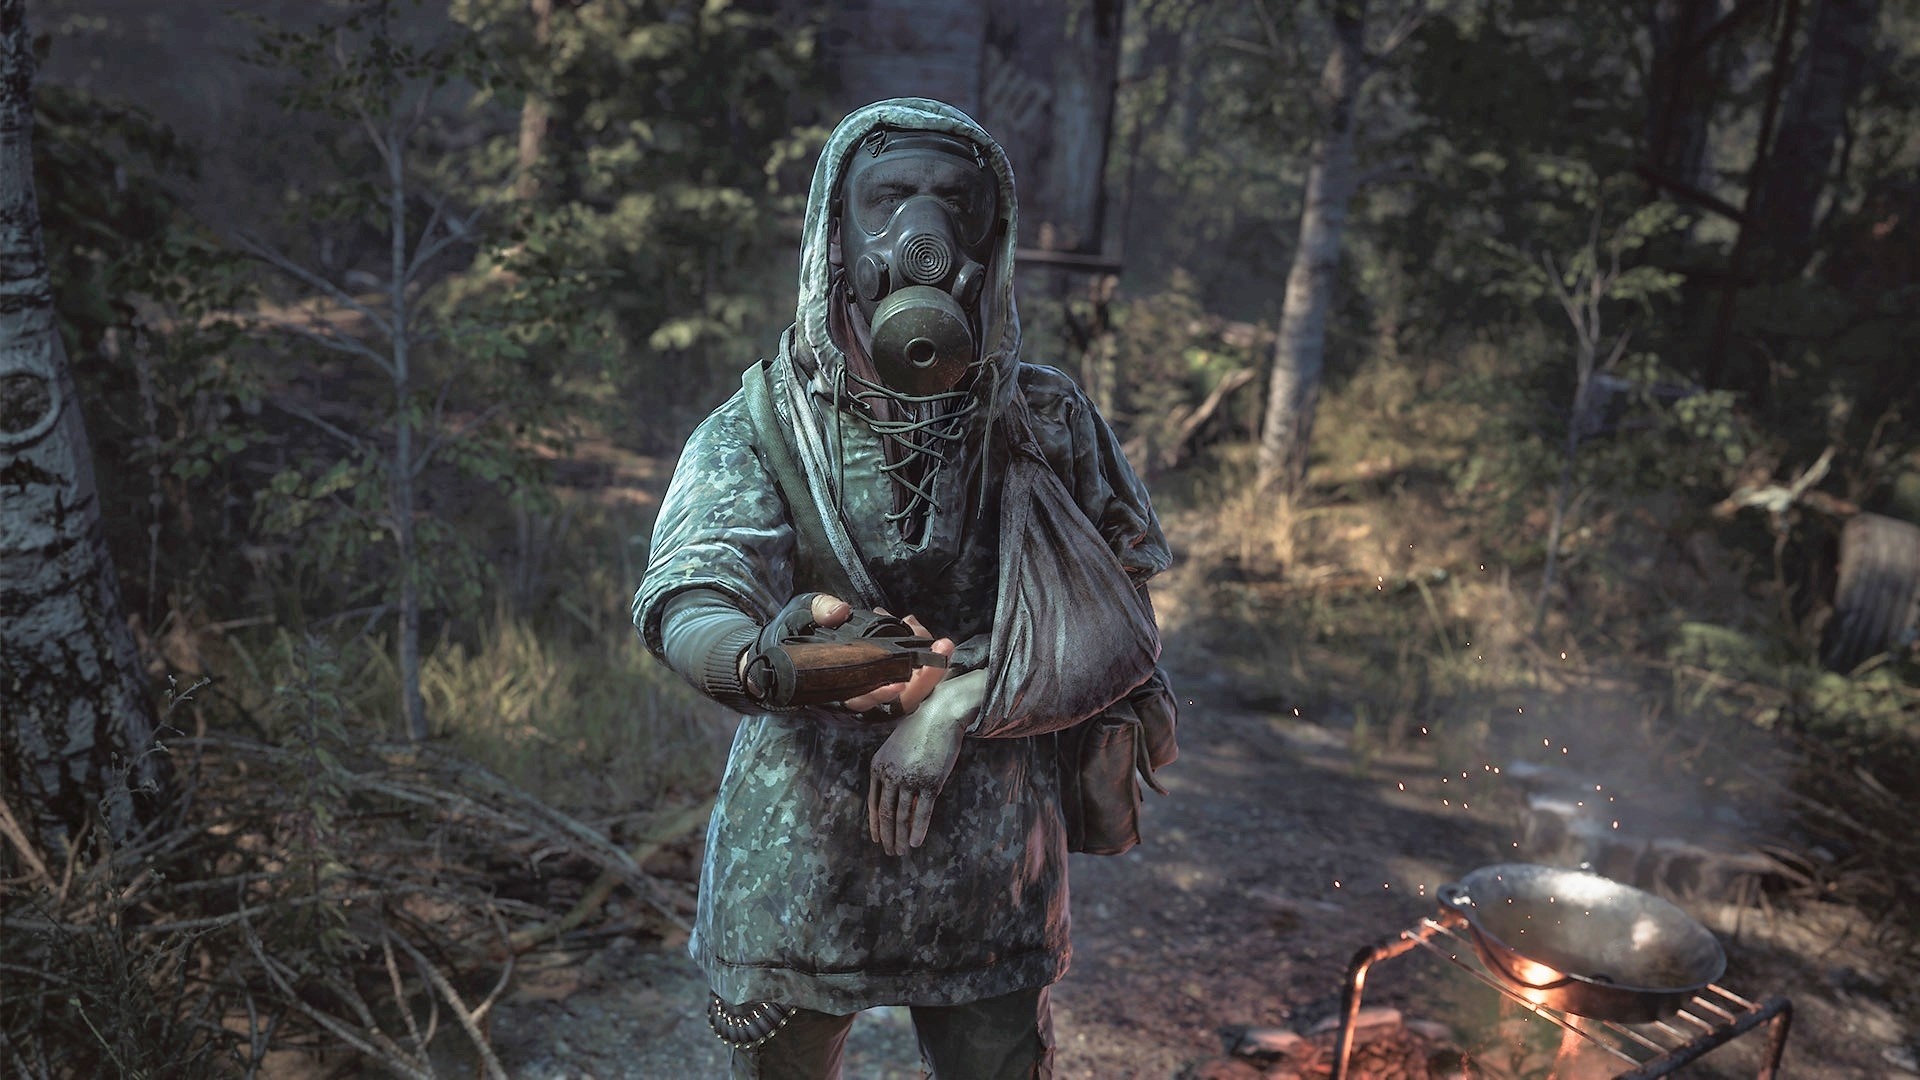 Chernobylite: New update & trailer set the mood for an early release